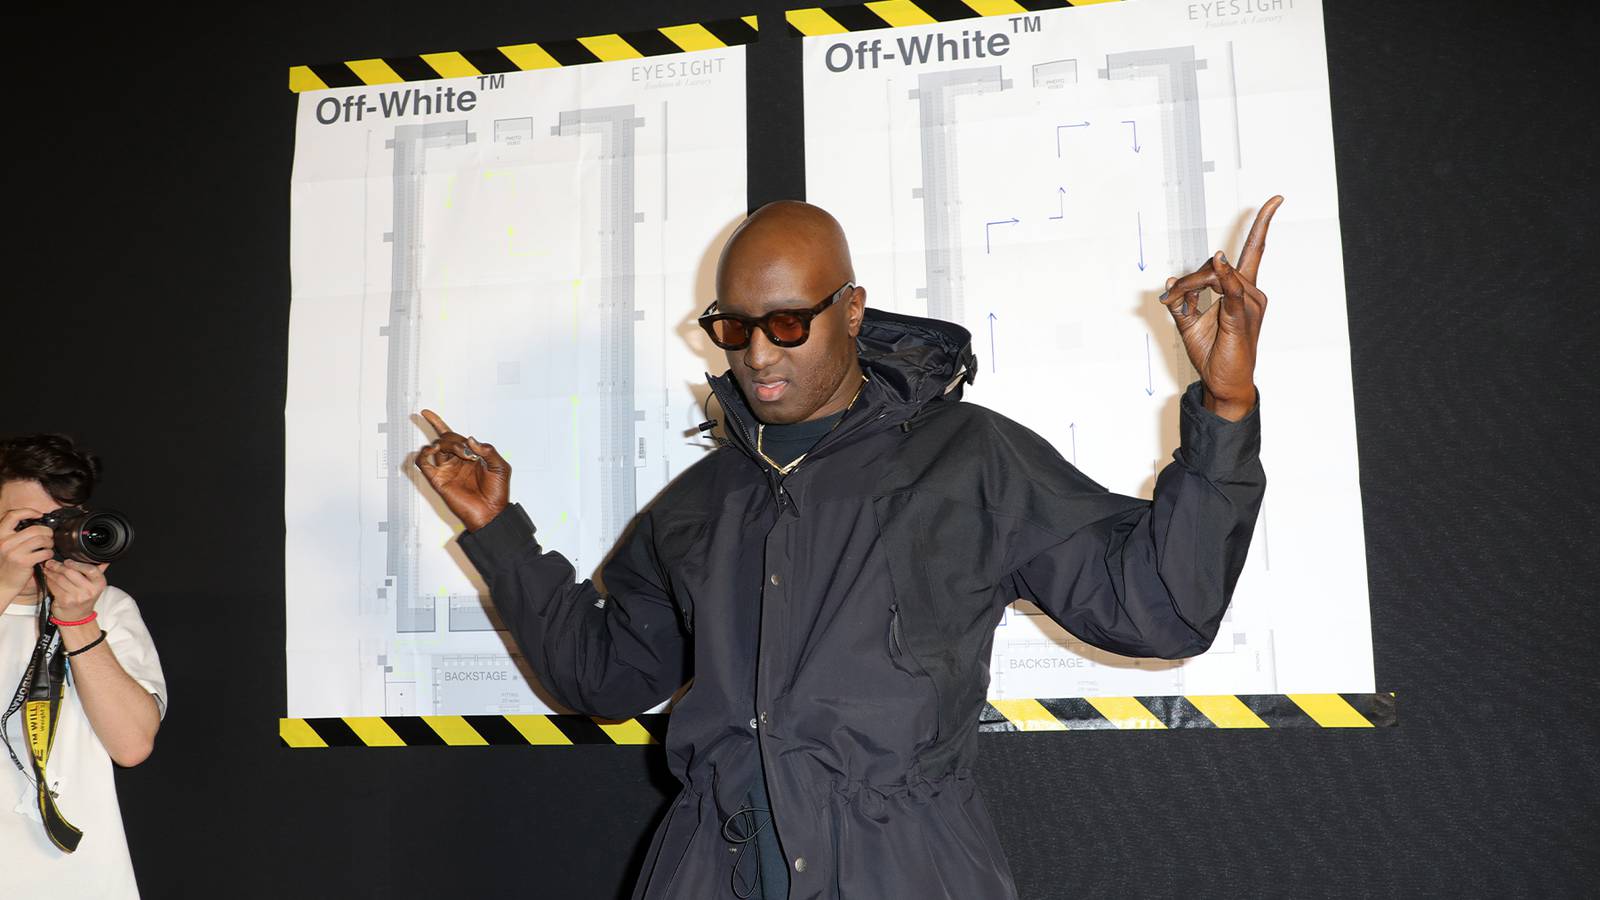 Virgil Abloh Has No Plans of Slowing Down